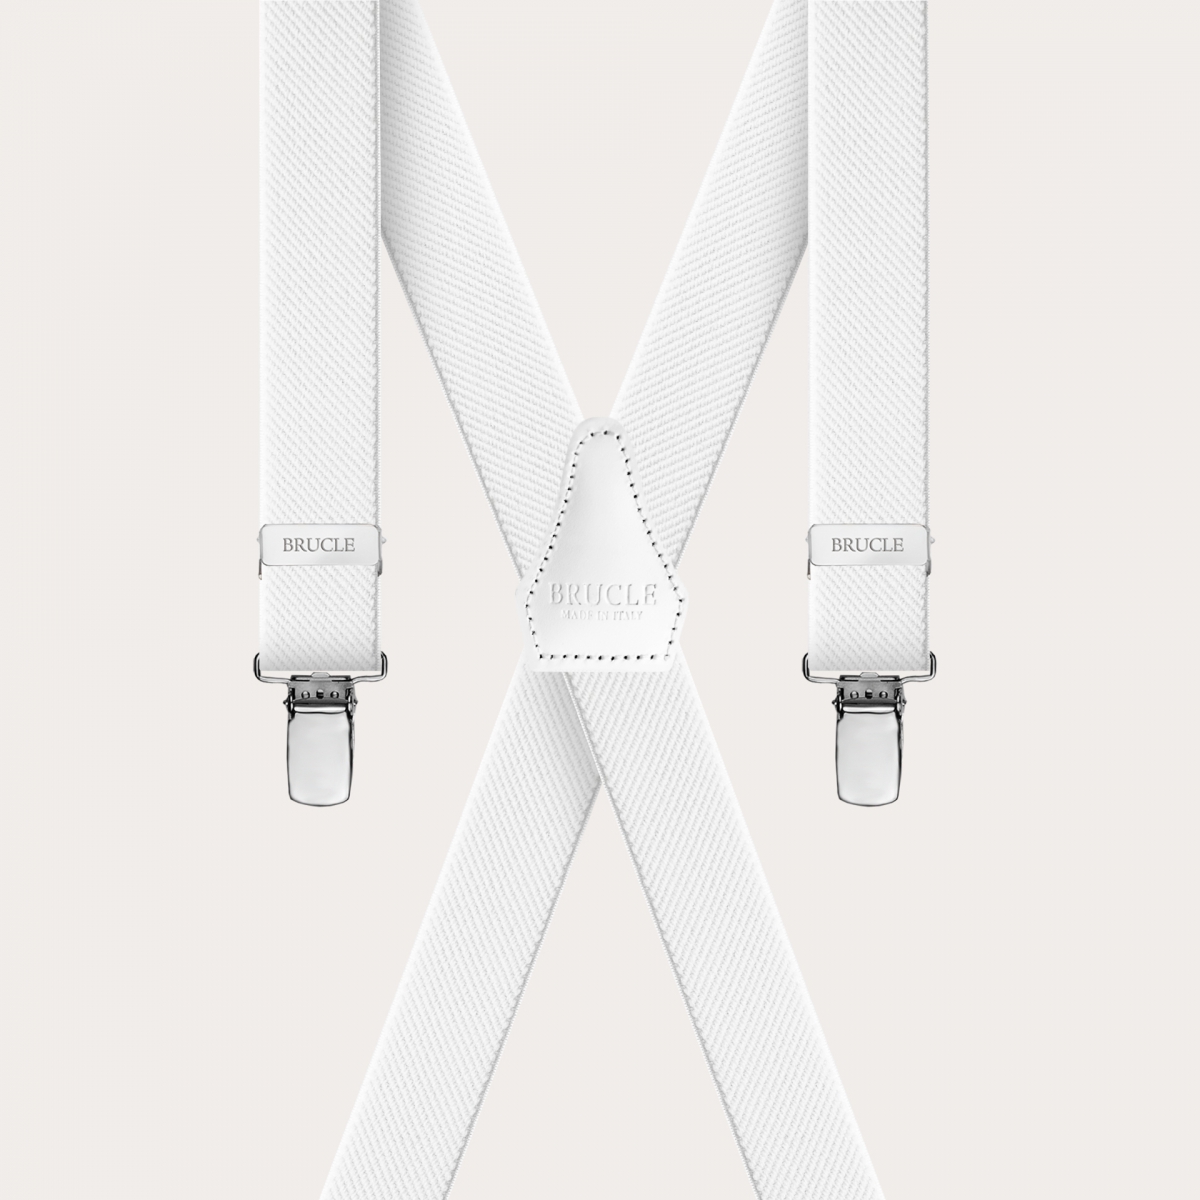 BRUCLE Unisex X-shaped suspenders, white